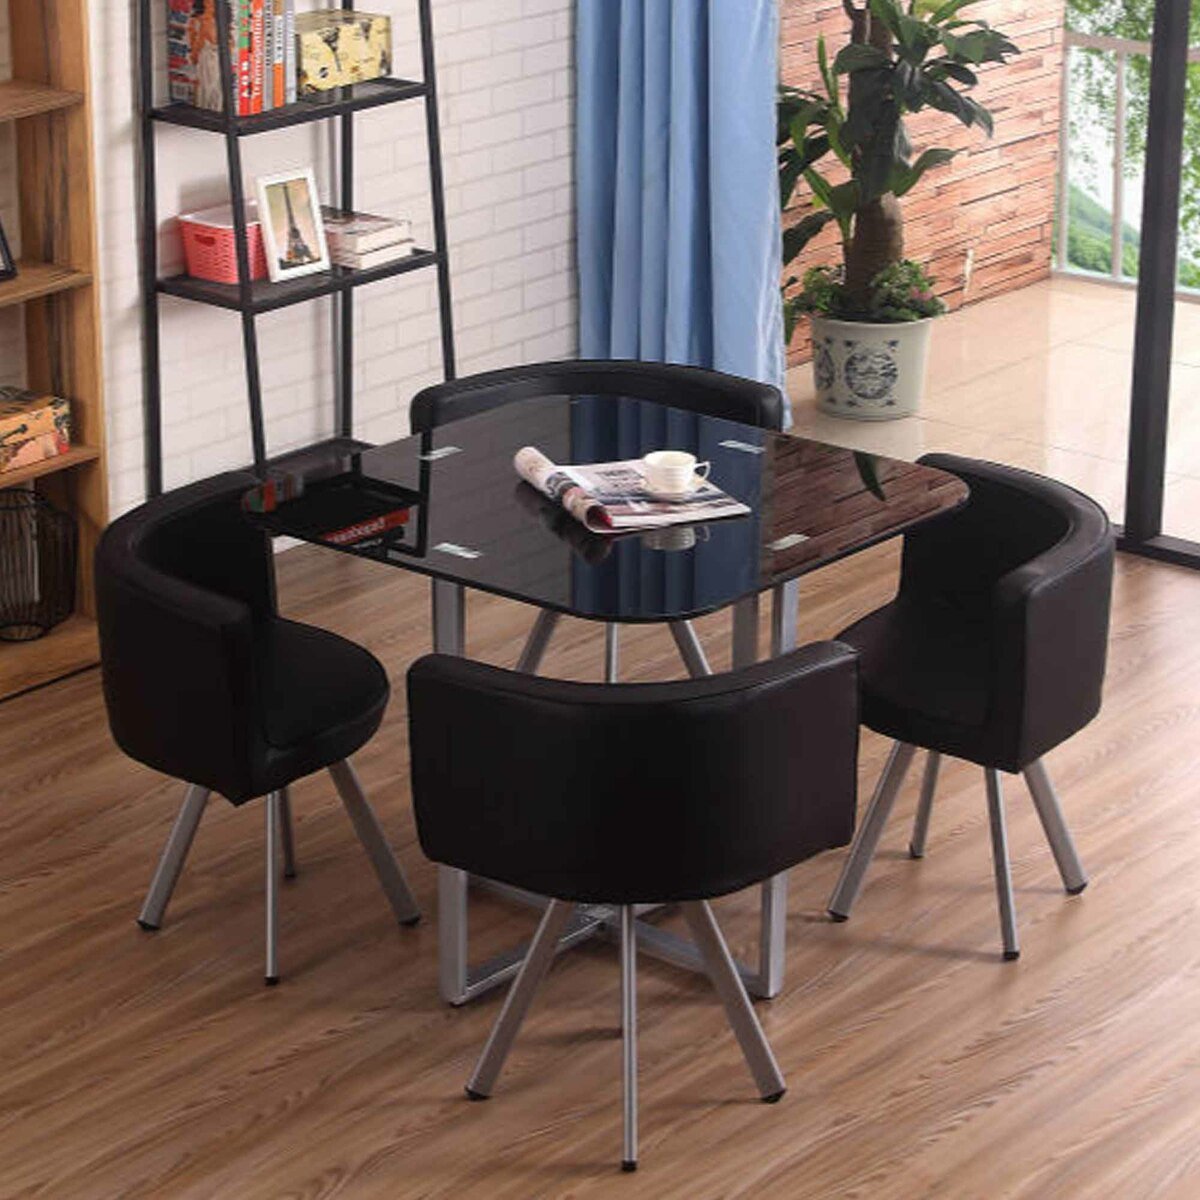 Maple Leaf Home Glass Dining Table Size: H75 x W90 x L90cm + 4 Chair Black Color